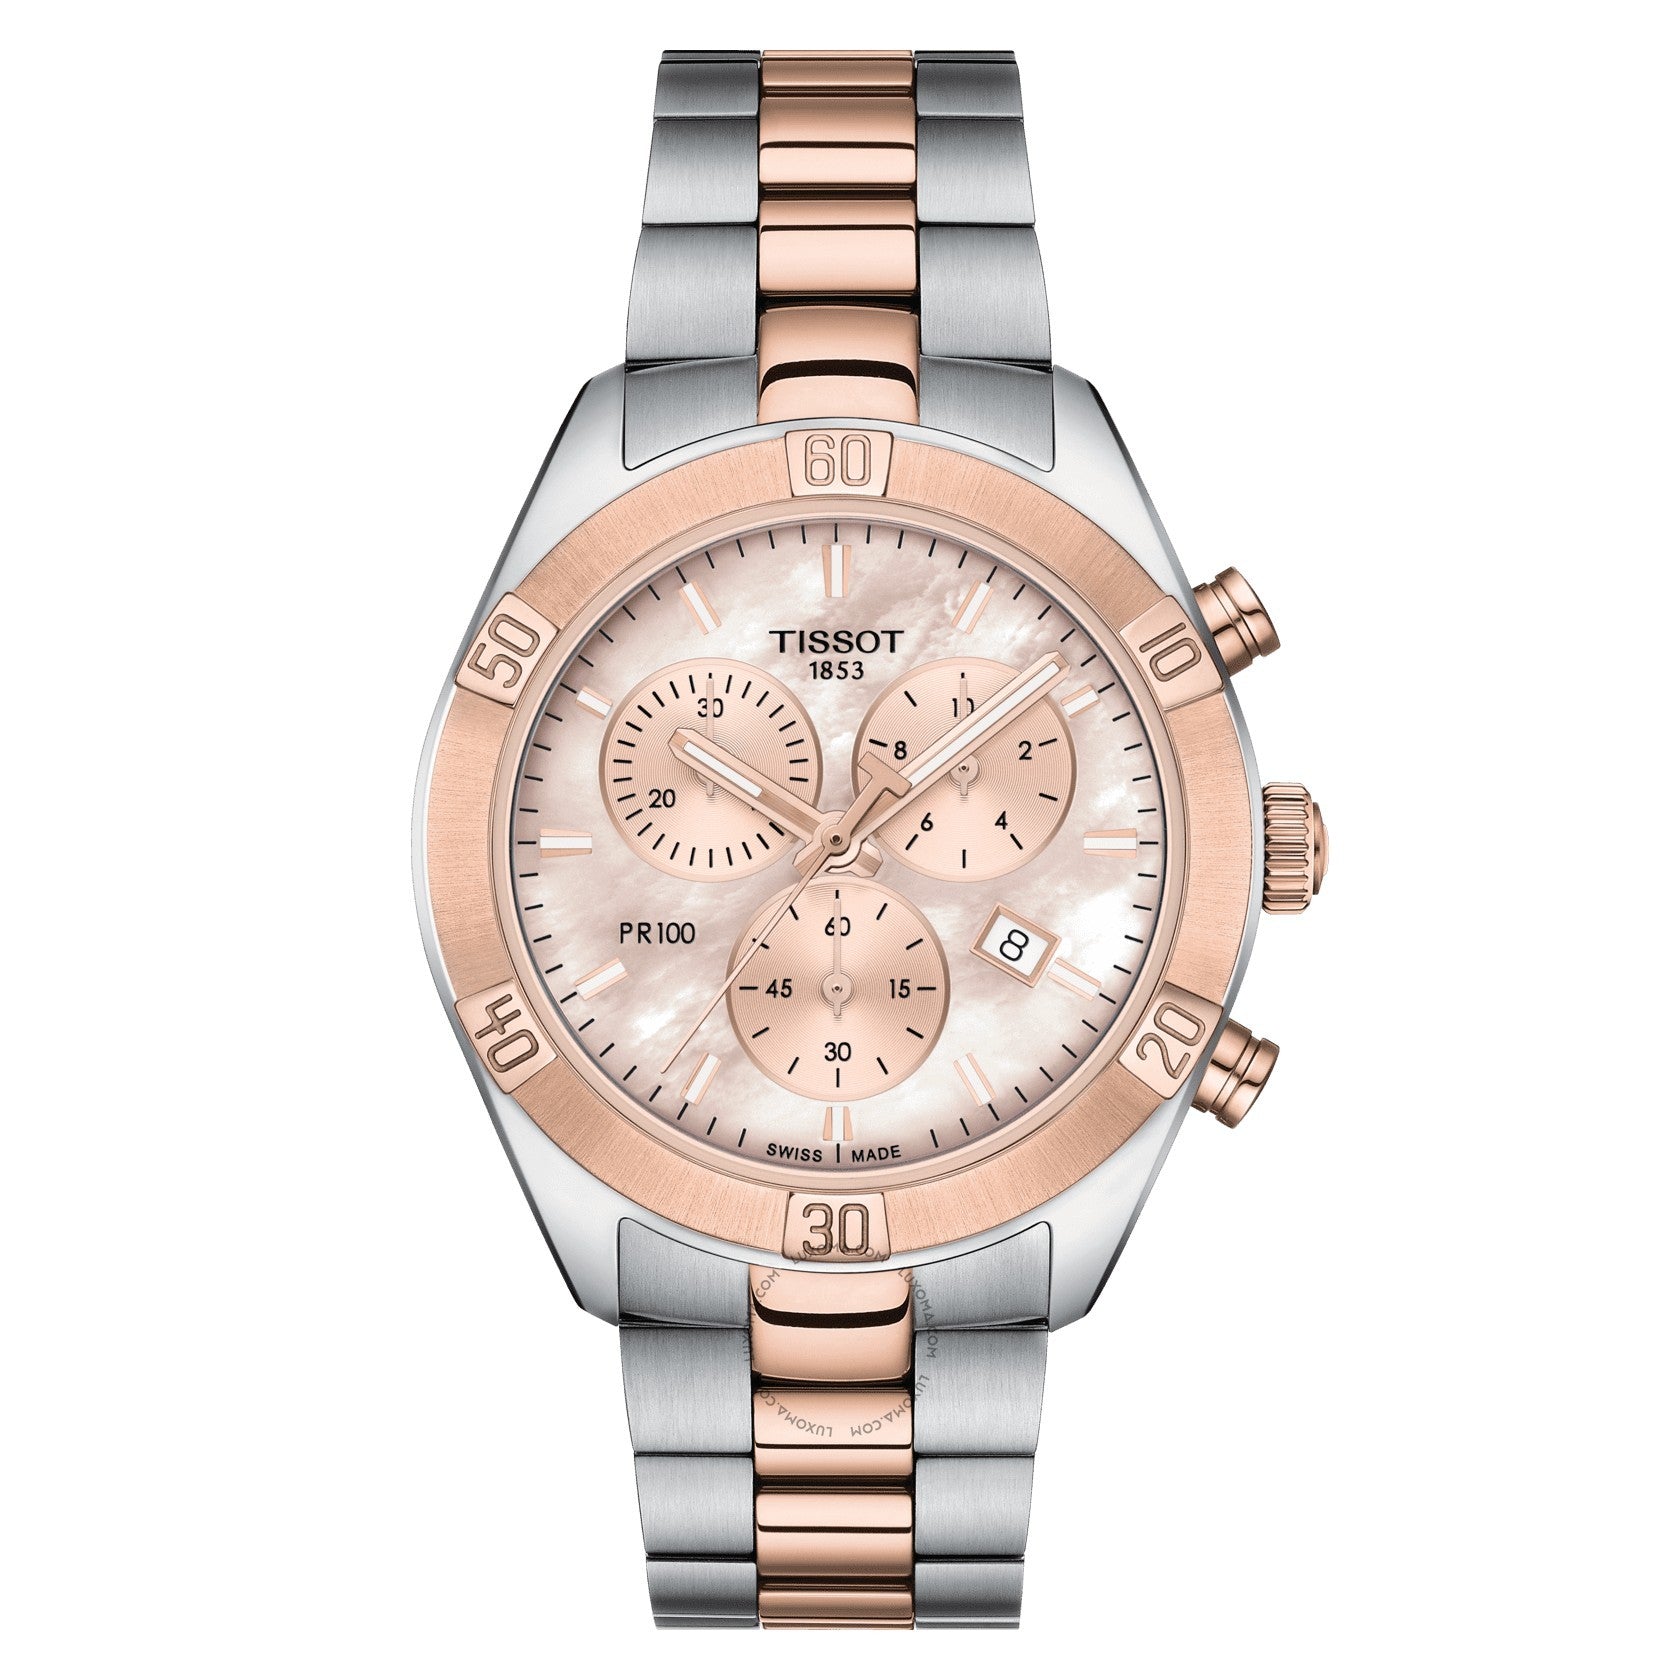 Tissot PR 100 Sport Chic Chronograph Pink Mother of Pearl Dial Ladies Watch T101.917.22.151.00